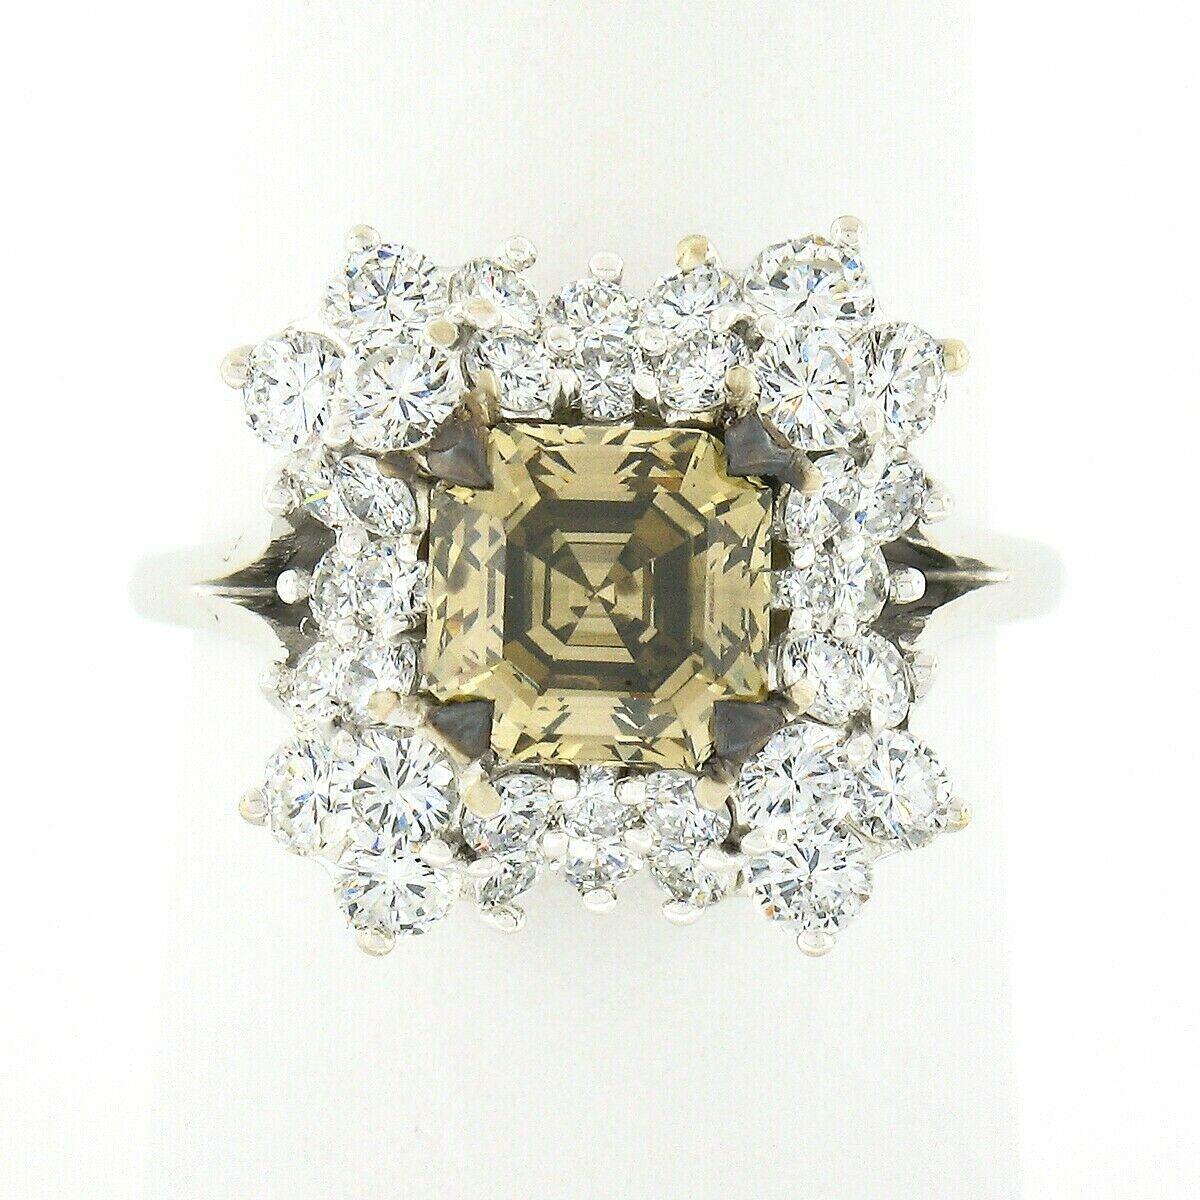 This gorgeous vintage diamond cocktail or engagement style ring is crafted in solid 18k white gold and features an amazing, 1.82 carat, GIA certified square emerald cut diamond neatly prong set at its center. The center stone has a natural, fancy